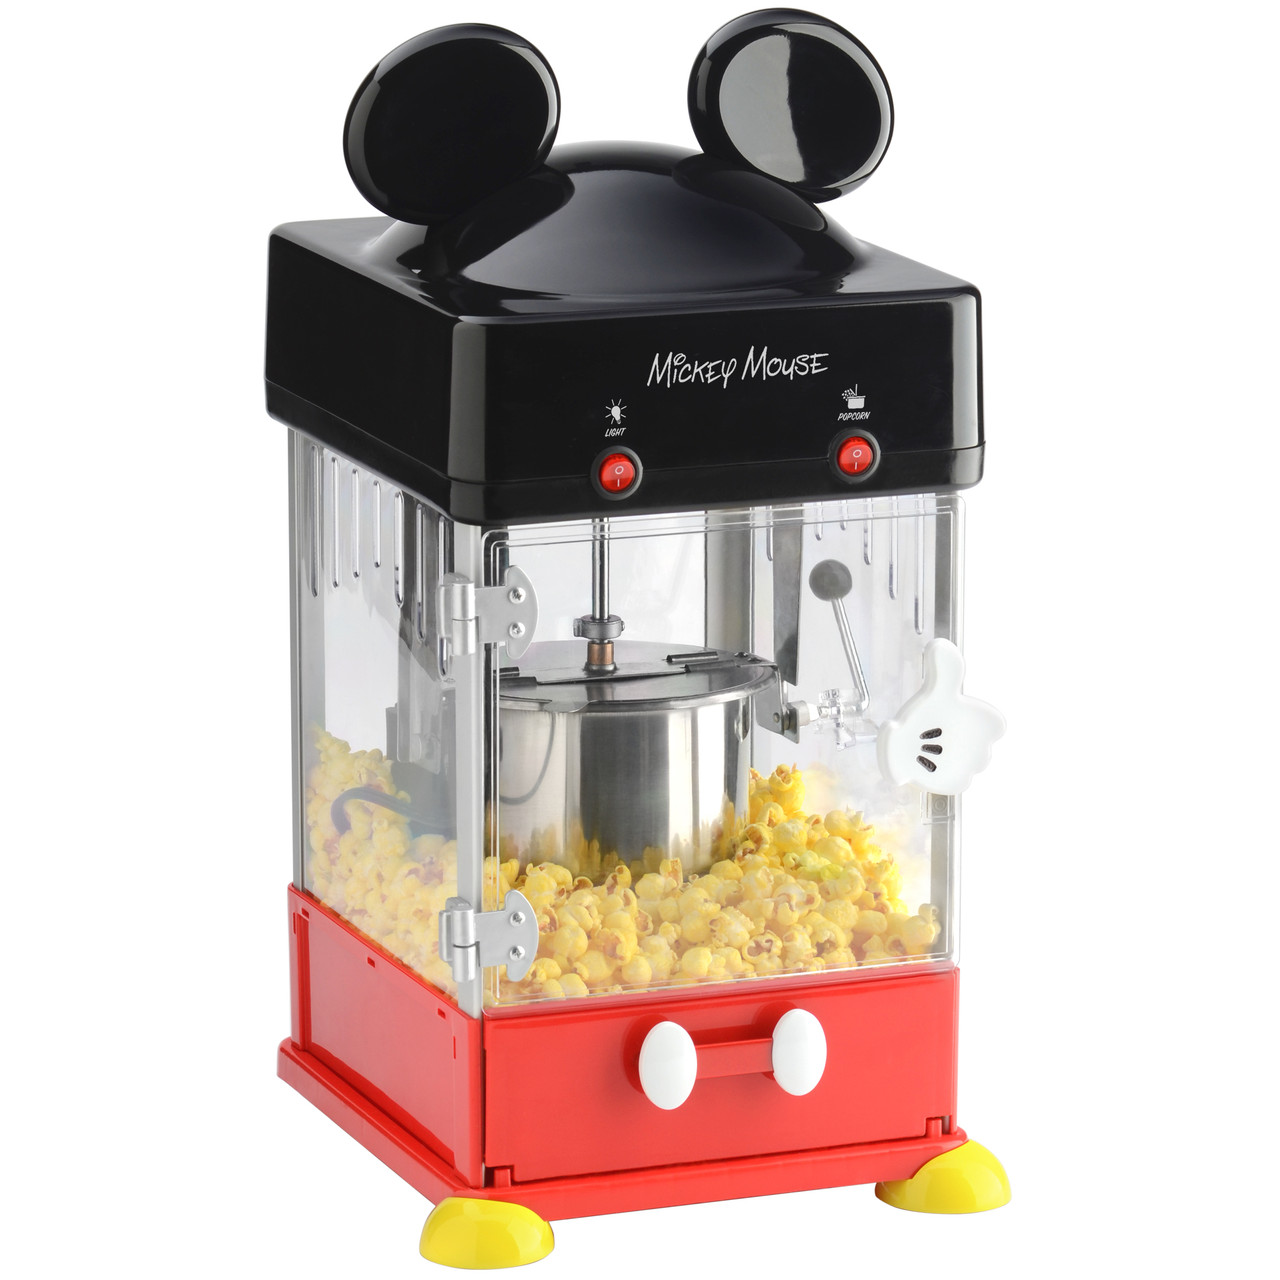 How to clean a popcorn maker?